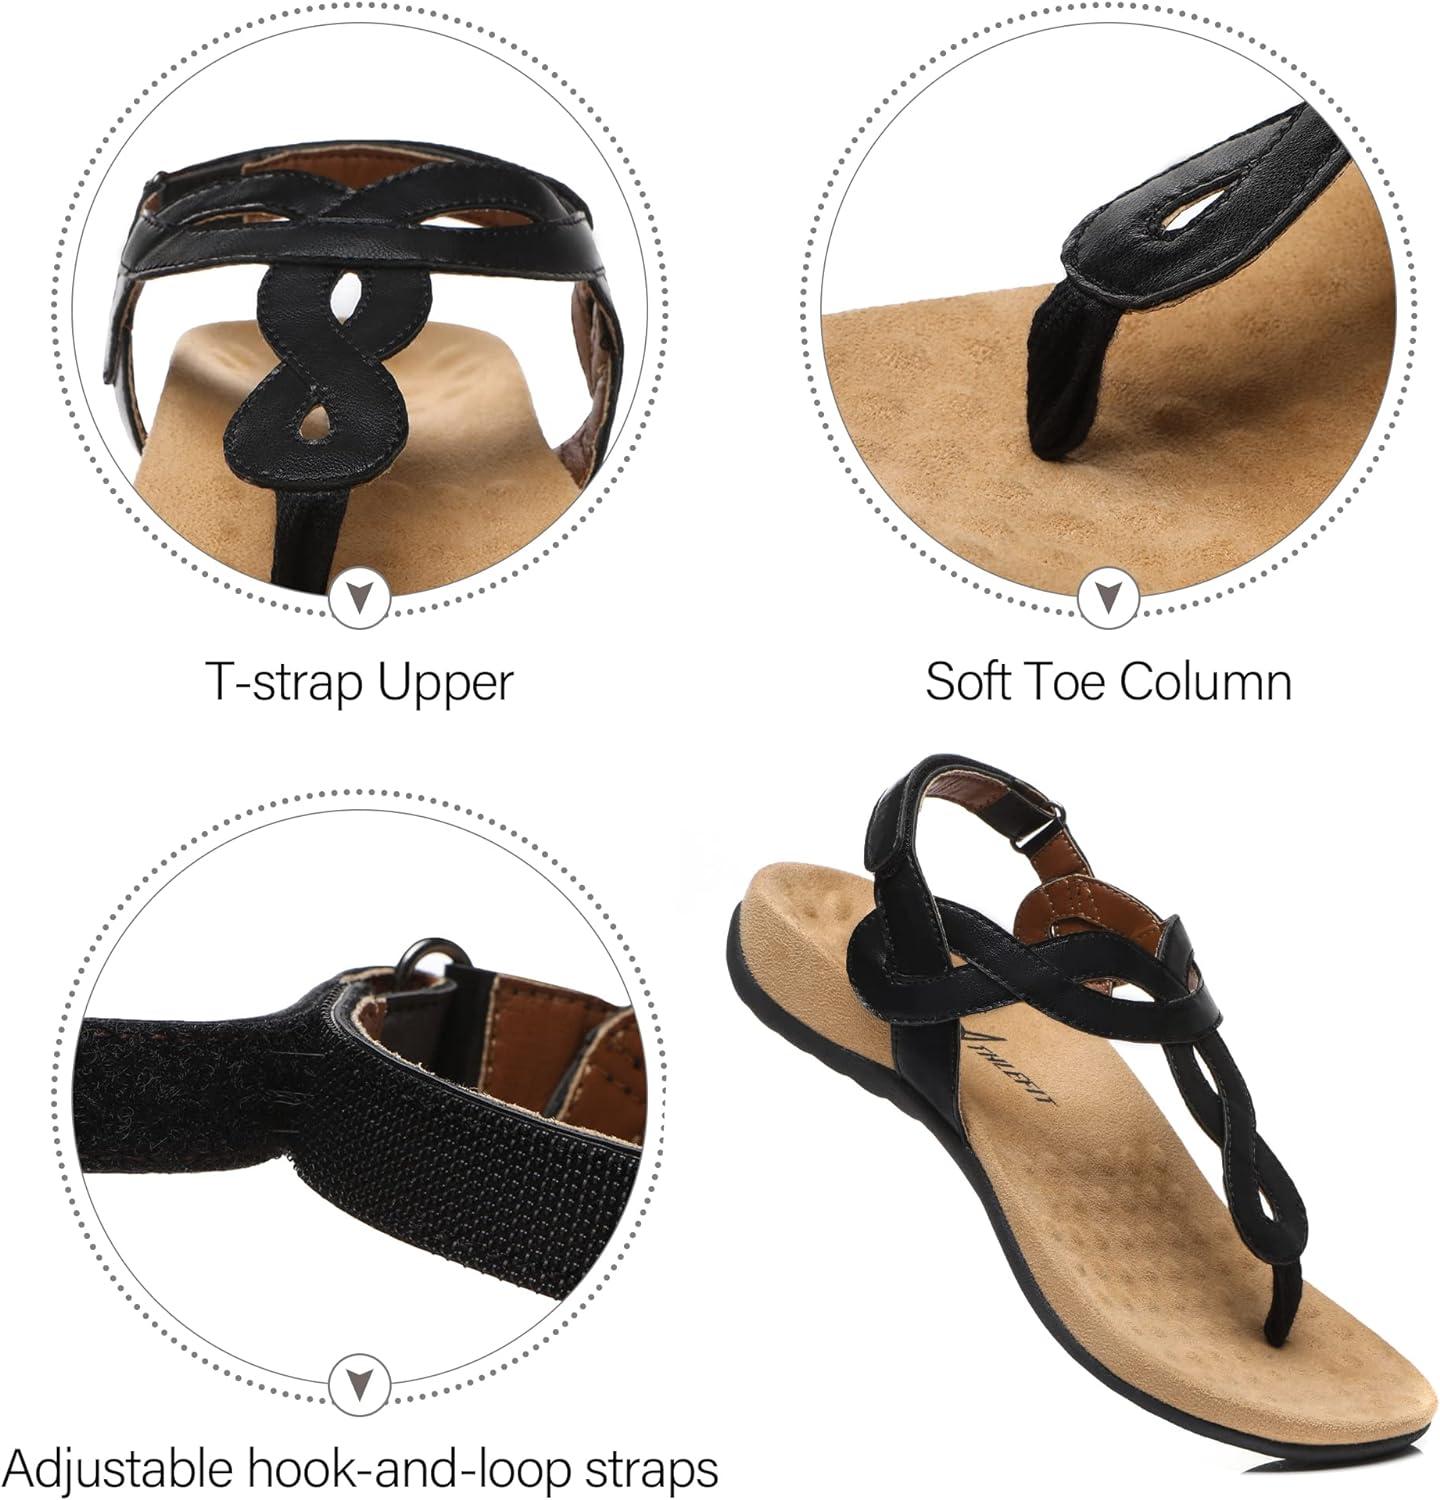 Latest Wedges Sandals || Wedge Shoes Collections || Comfortable High Shoes  for Girls || | Fashion shoes flats, Fashion shoes heels, Casual shoes women